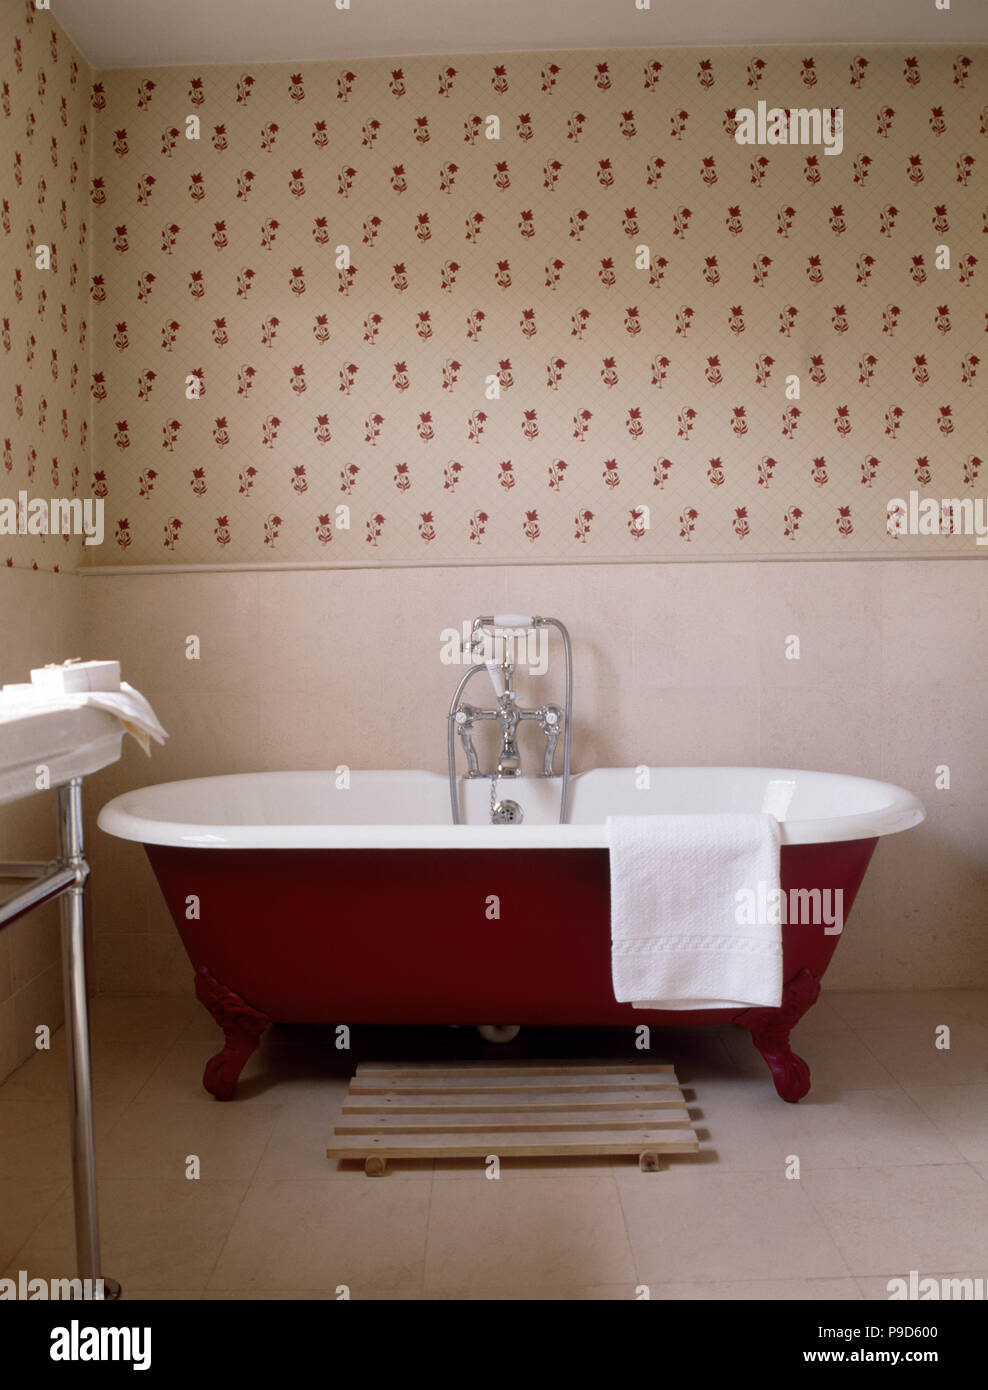 Red roll top bath in traditional bathroom with red sprigged wallpaper Stock Photo